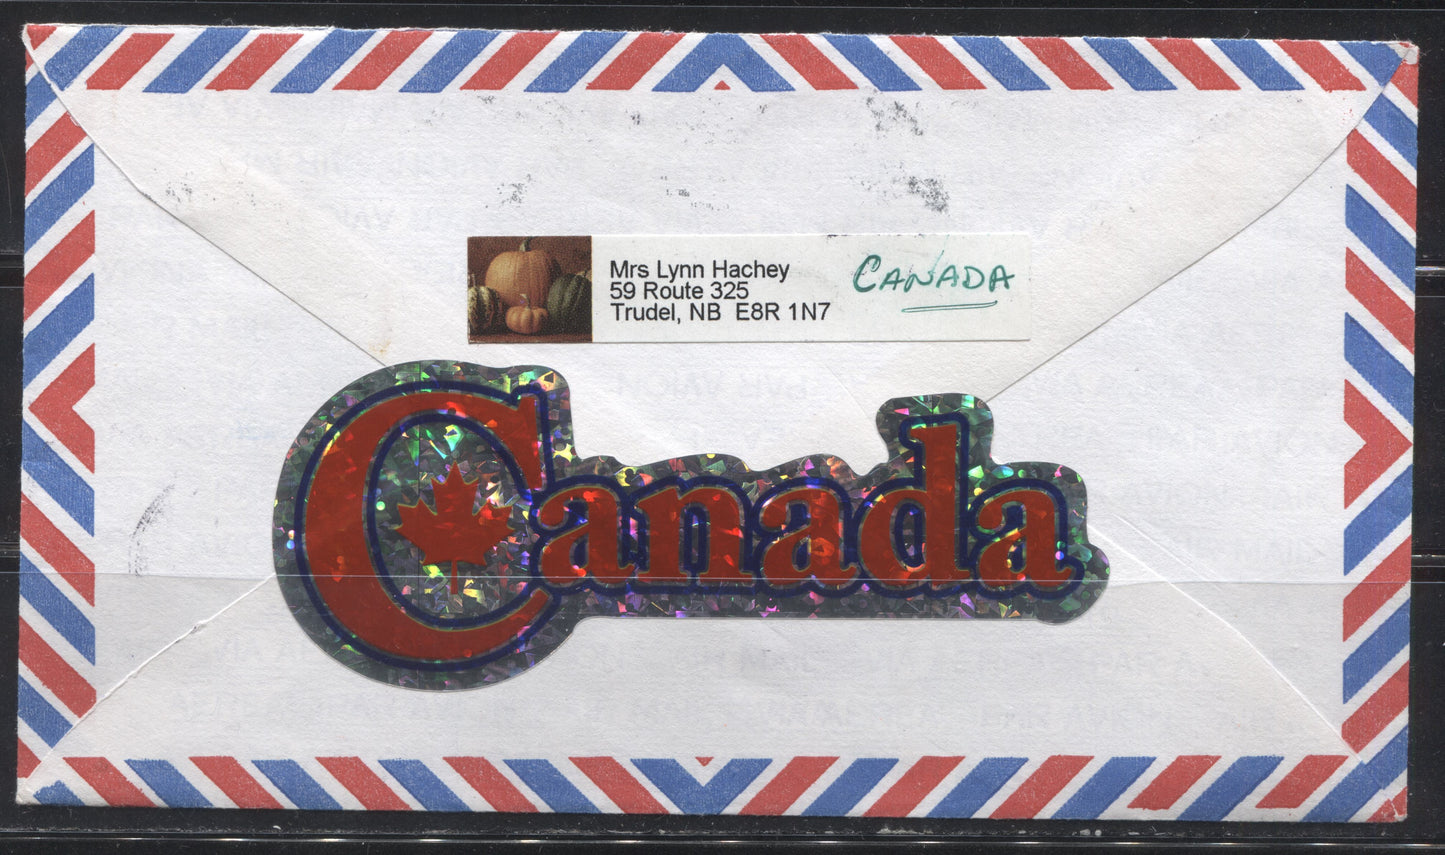 Canada #1674, 1678 2c Ironwork & 9c Quilting, 1998-2003 Trades and Wildlife Issue, Combination Use on September 2001 Cover to New Zealand